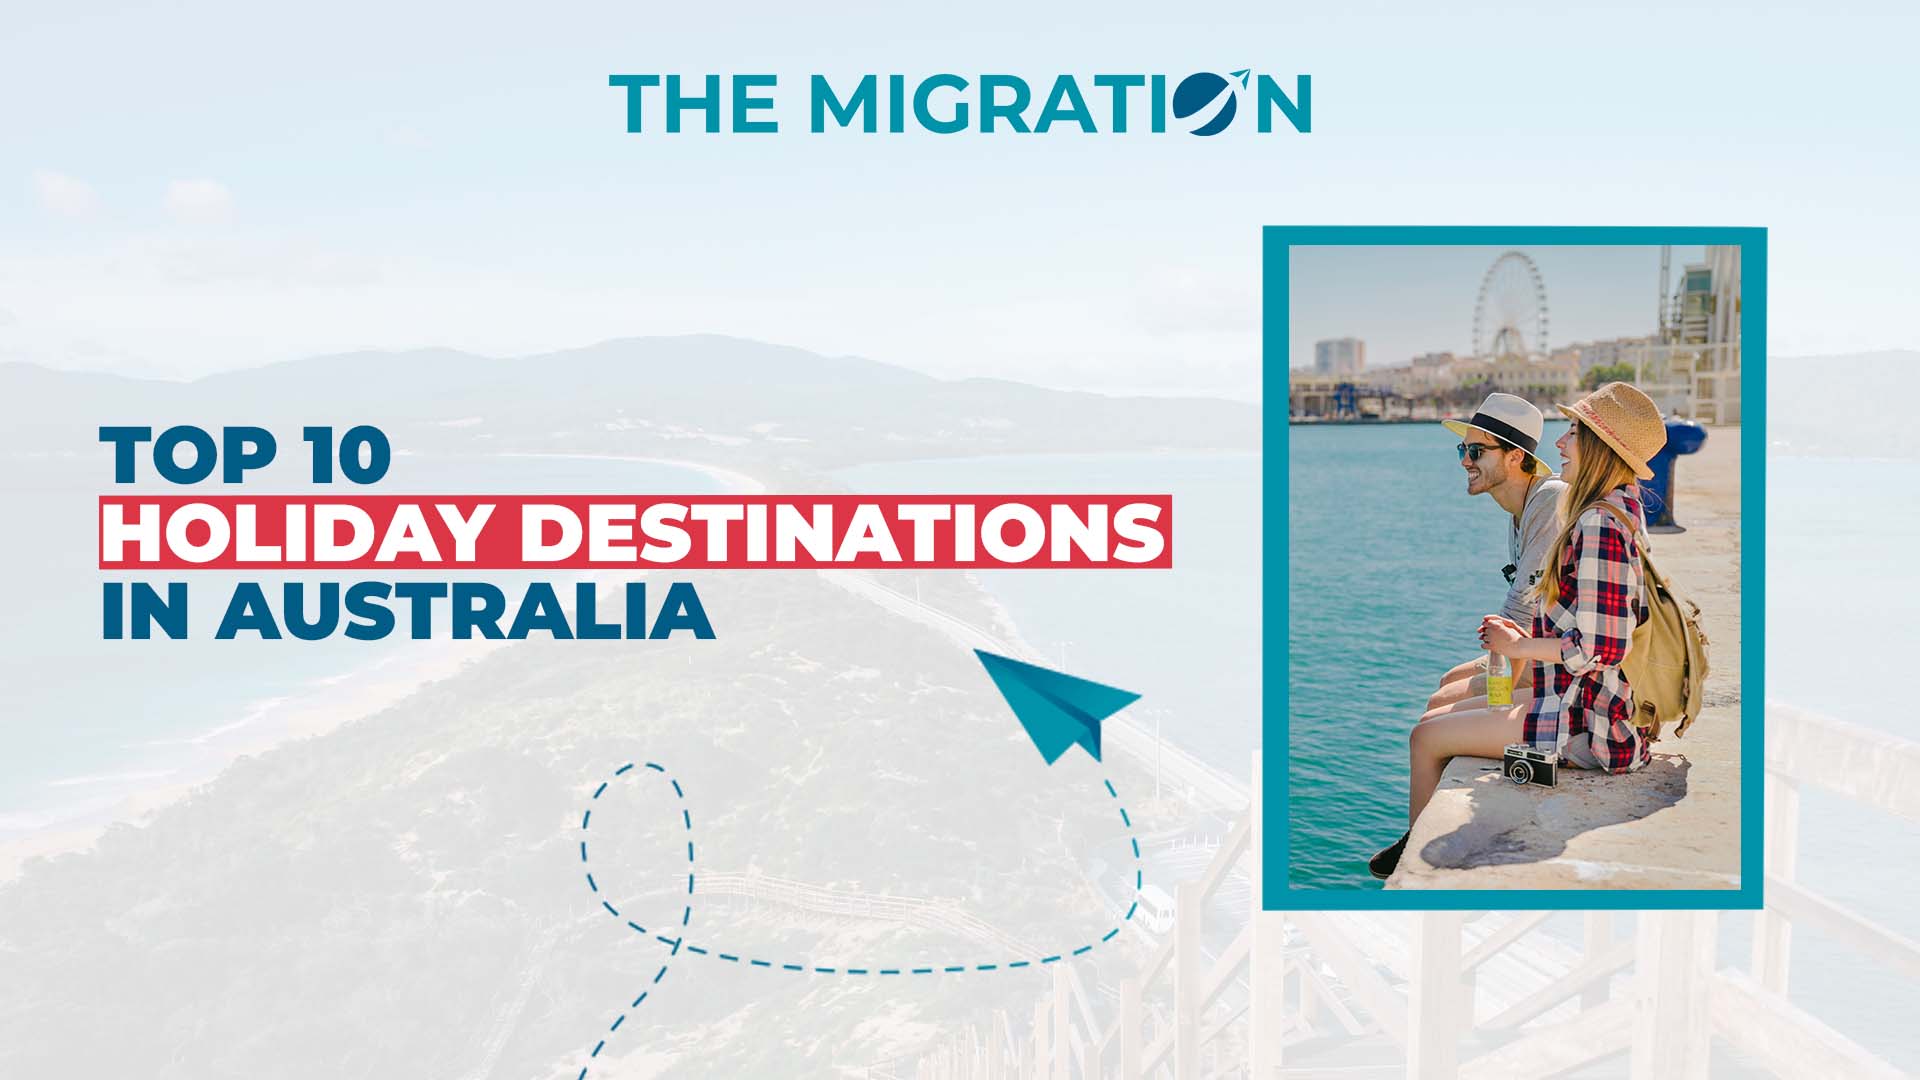 Top 10 Holiday Destinations in Australia